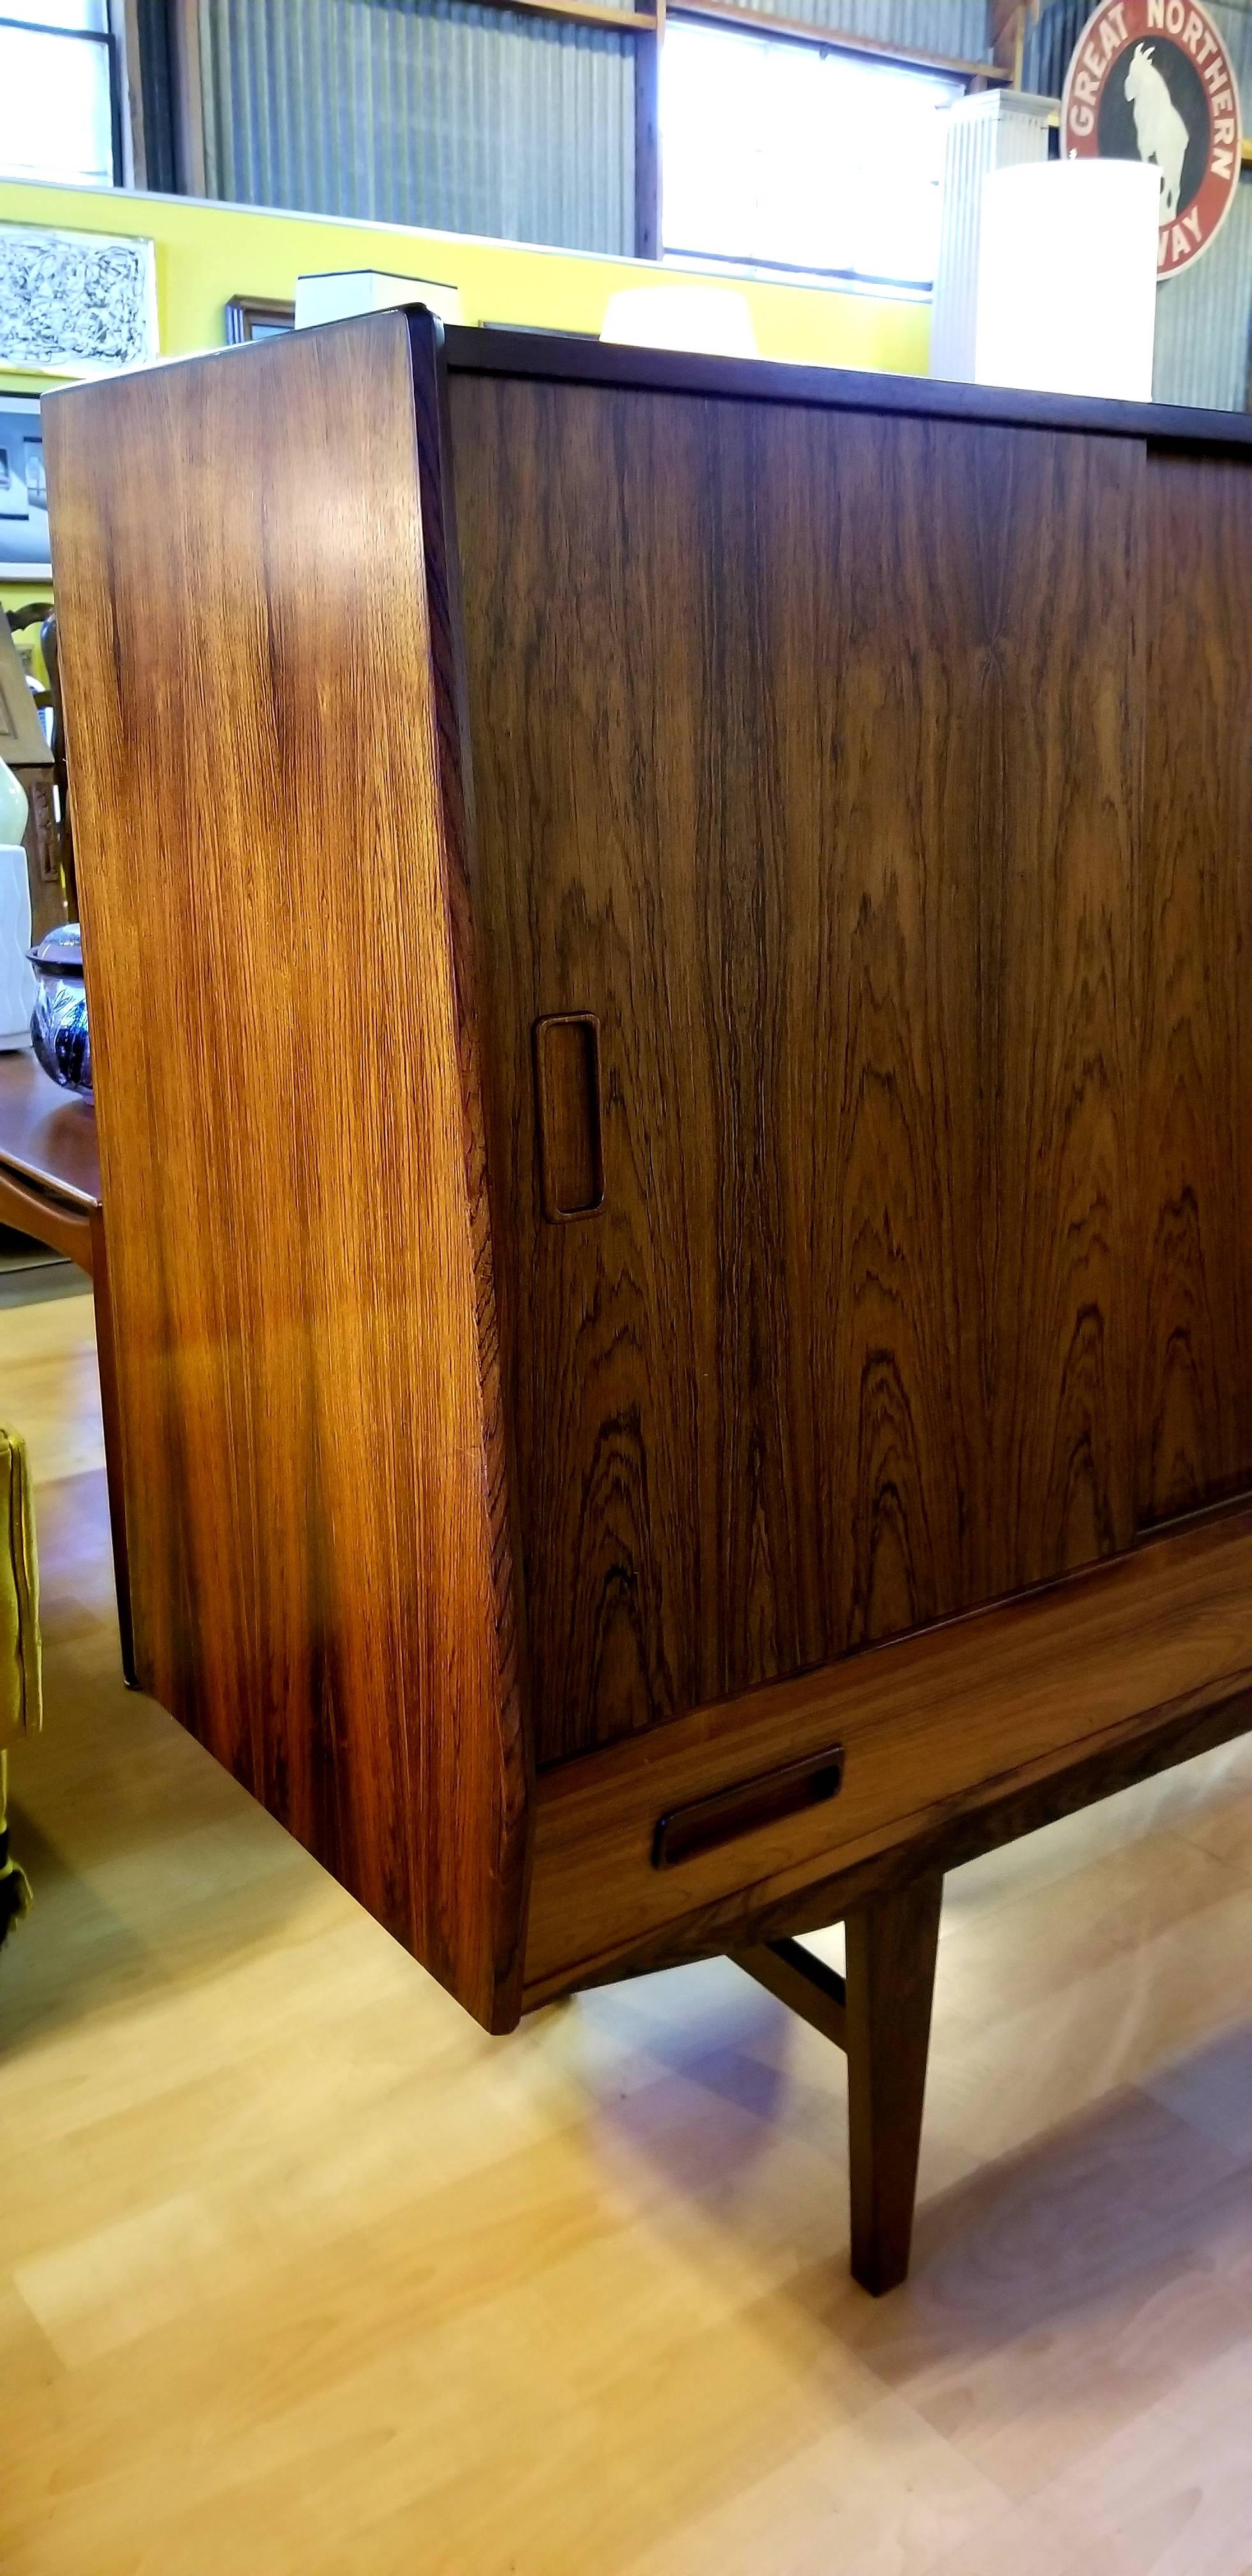 Beautiful, warm glow and figured wood grain to book matched rosewood credenza designed by Borge Seindal for Westergaards Mobelfabrik, Denmark, circa 1960s. Sliding doors with ample storage and center dry bar with mirrored back. Two lower drawers for